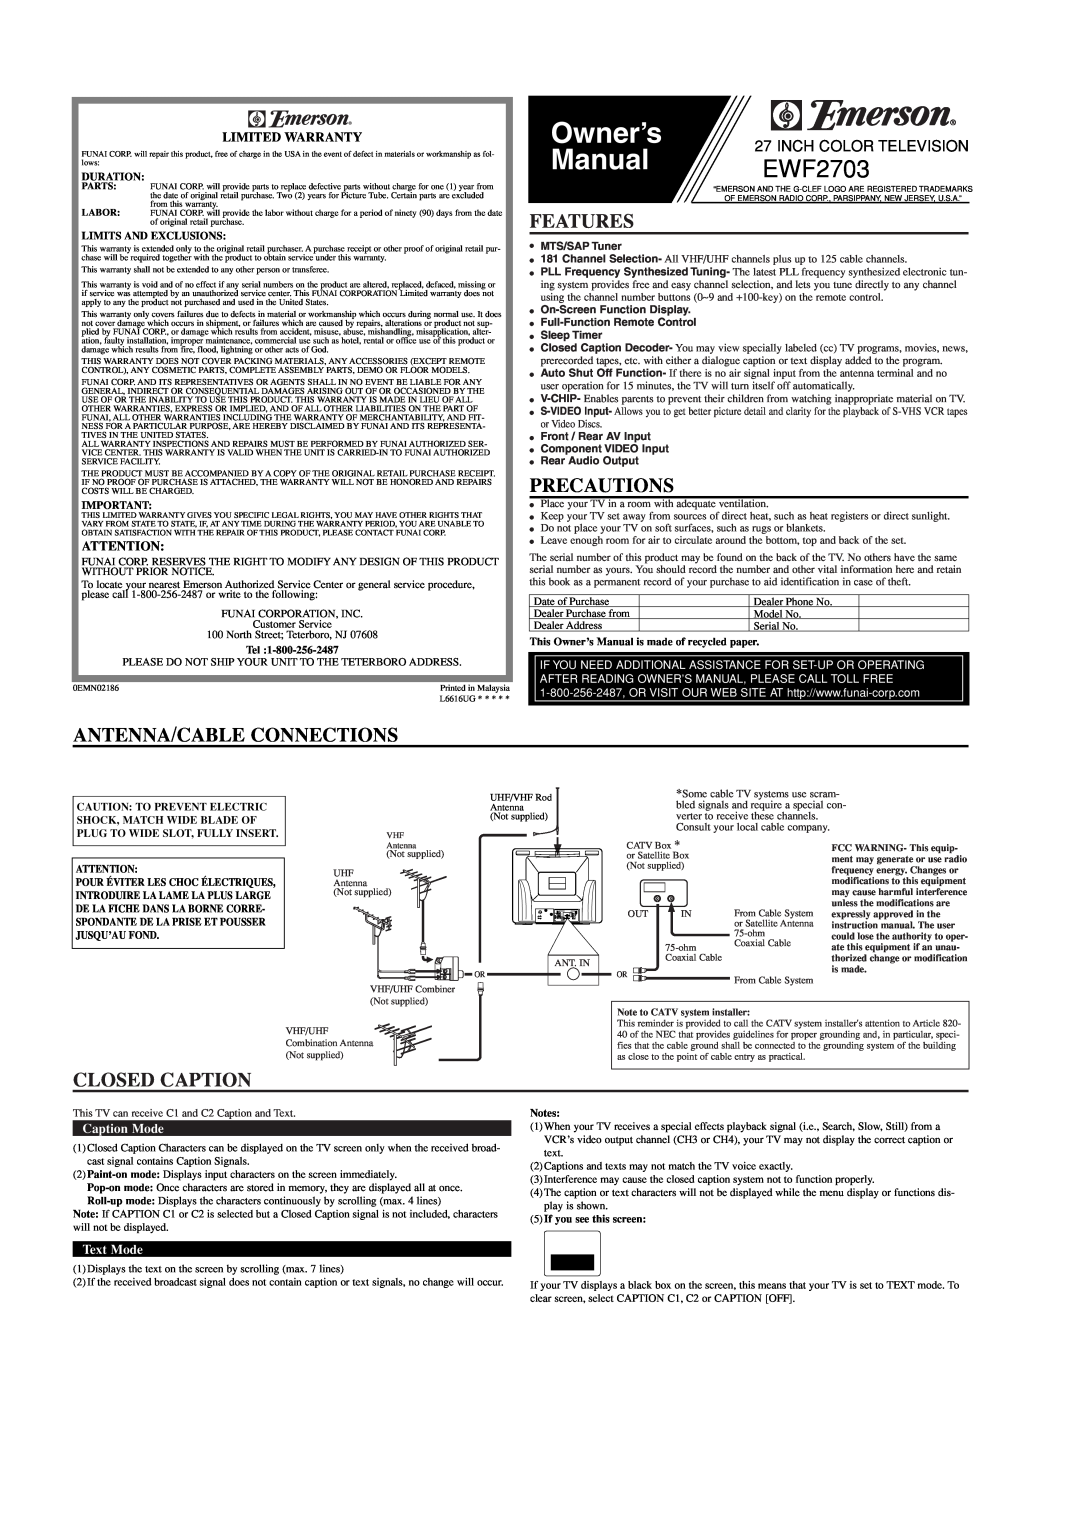 Emerson EWF2703 owner manual Features, Precautions, Antenna/Cable Connections, Closed Caption, Limited Warranty, Text Mode 